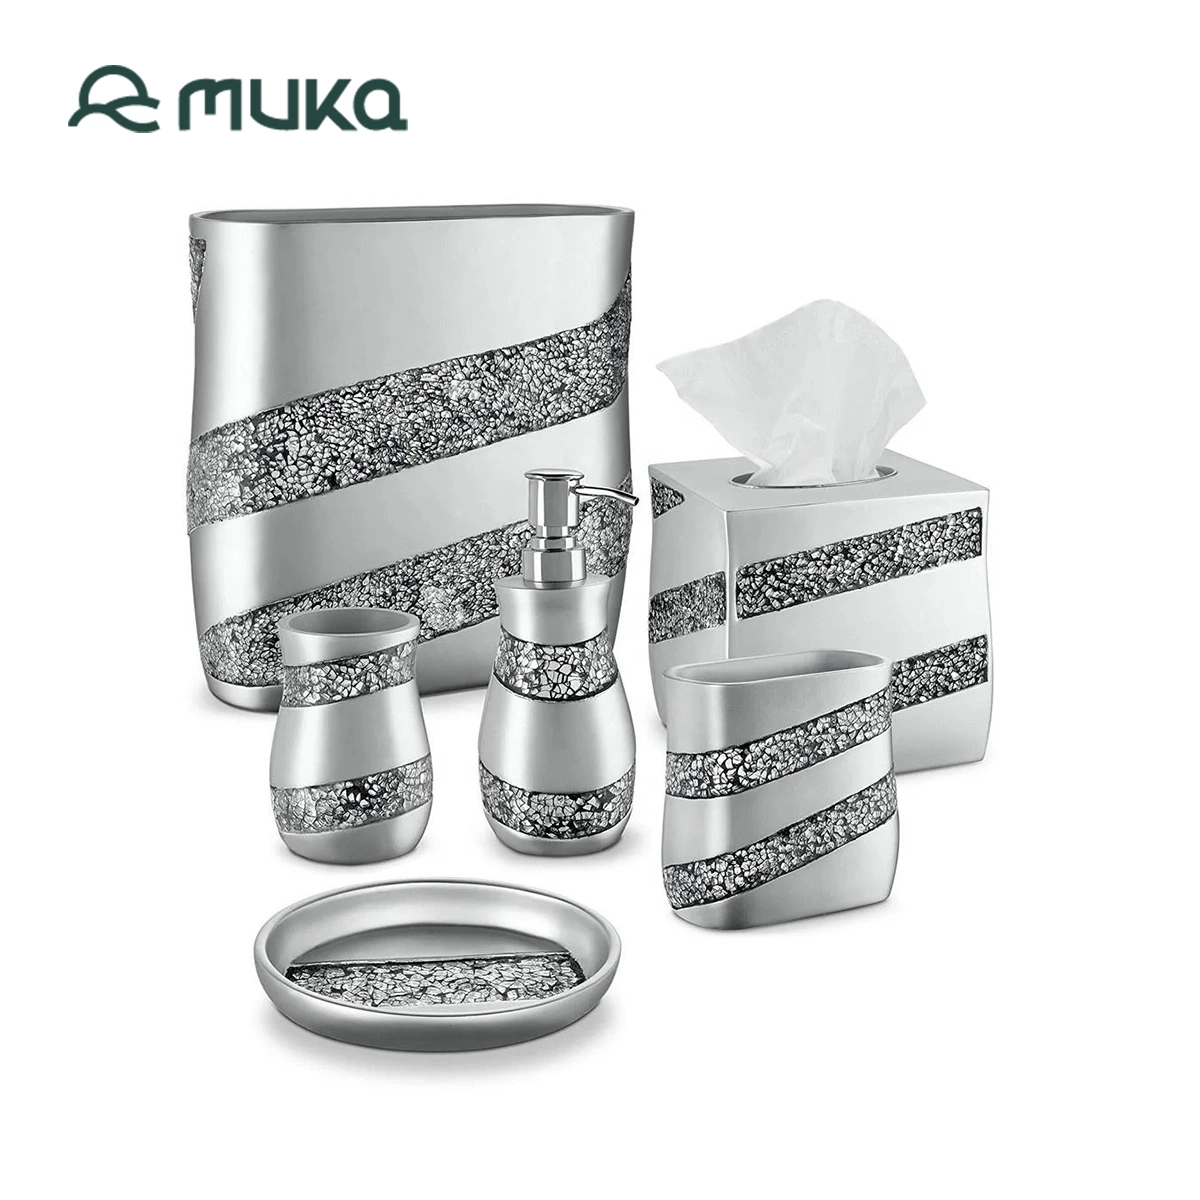 Hotel Luxury Silver Mosaic Glass Bathroom Accessories for Christmas Gift Set Toothbrush Holder Bathroom Products